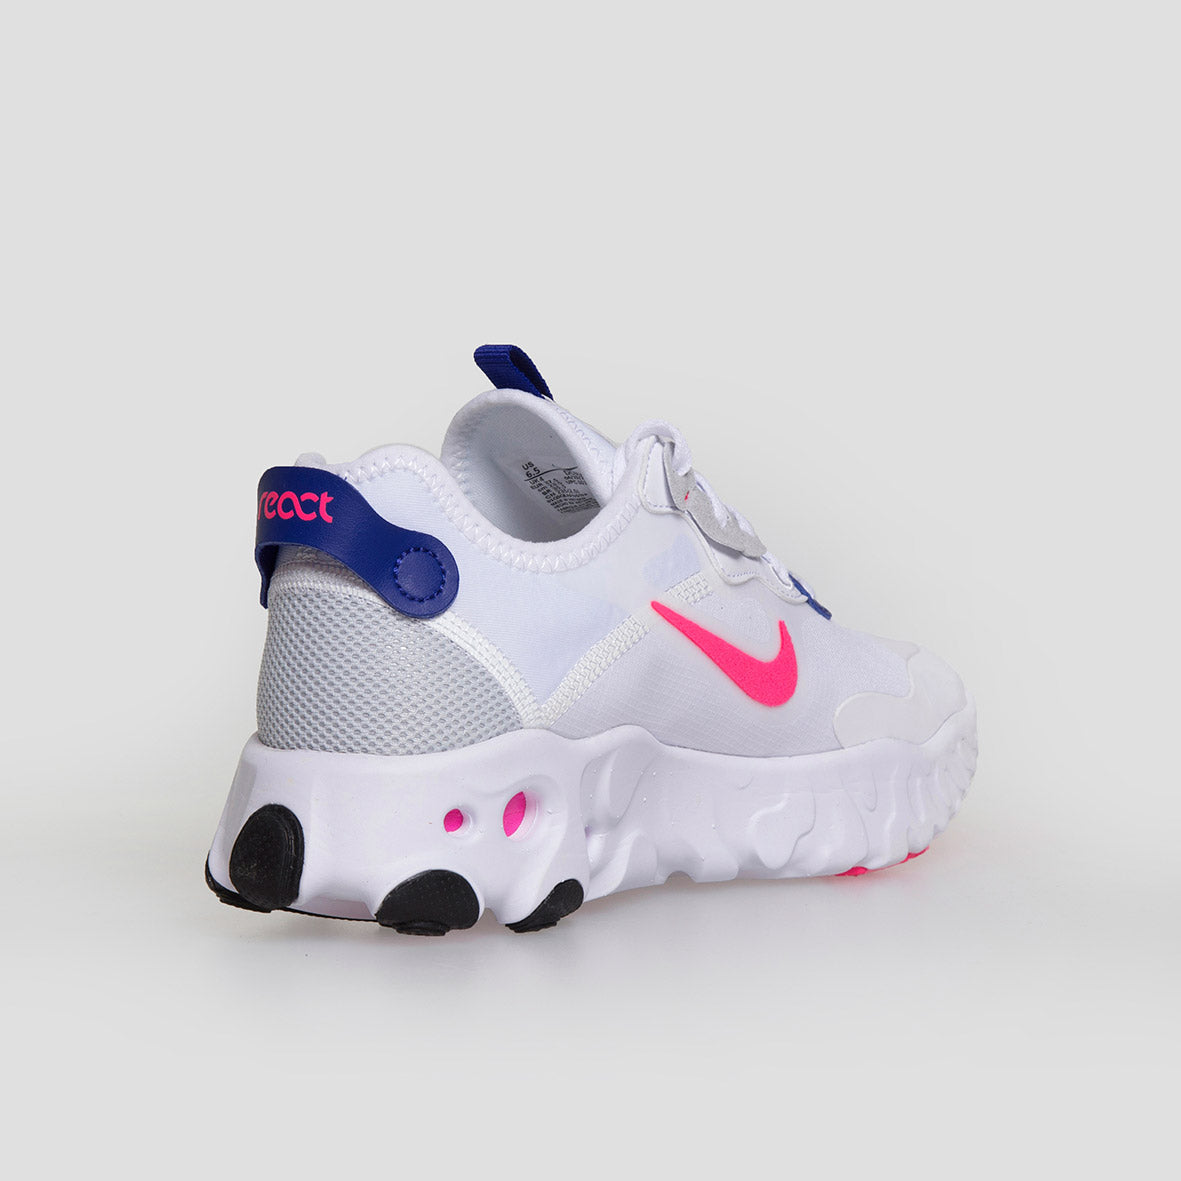 Nike. Sneakers React Art3mis - DC9212-100 - Women's Collection